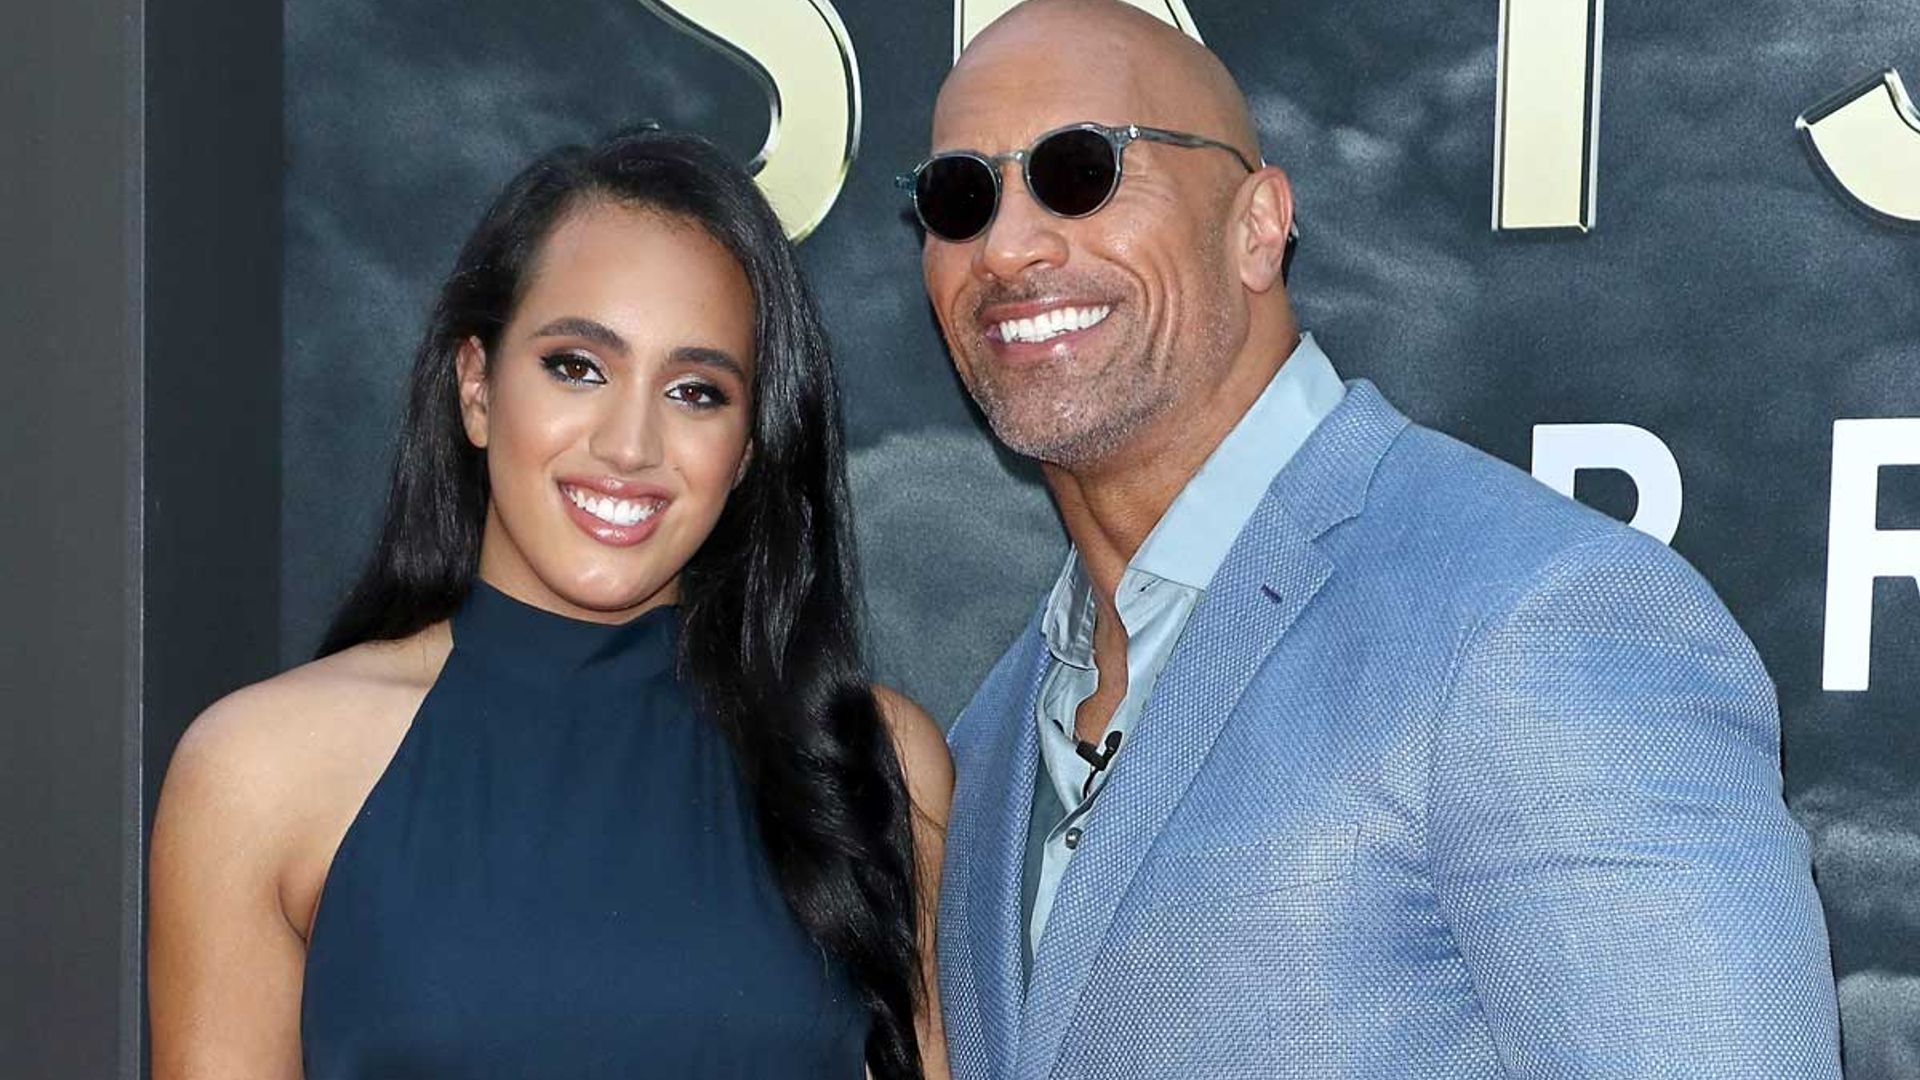 Dwayne 'The Rock' Johnson's daughter enters the world of wrestling – and has the coolest ring name